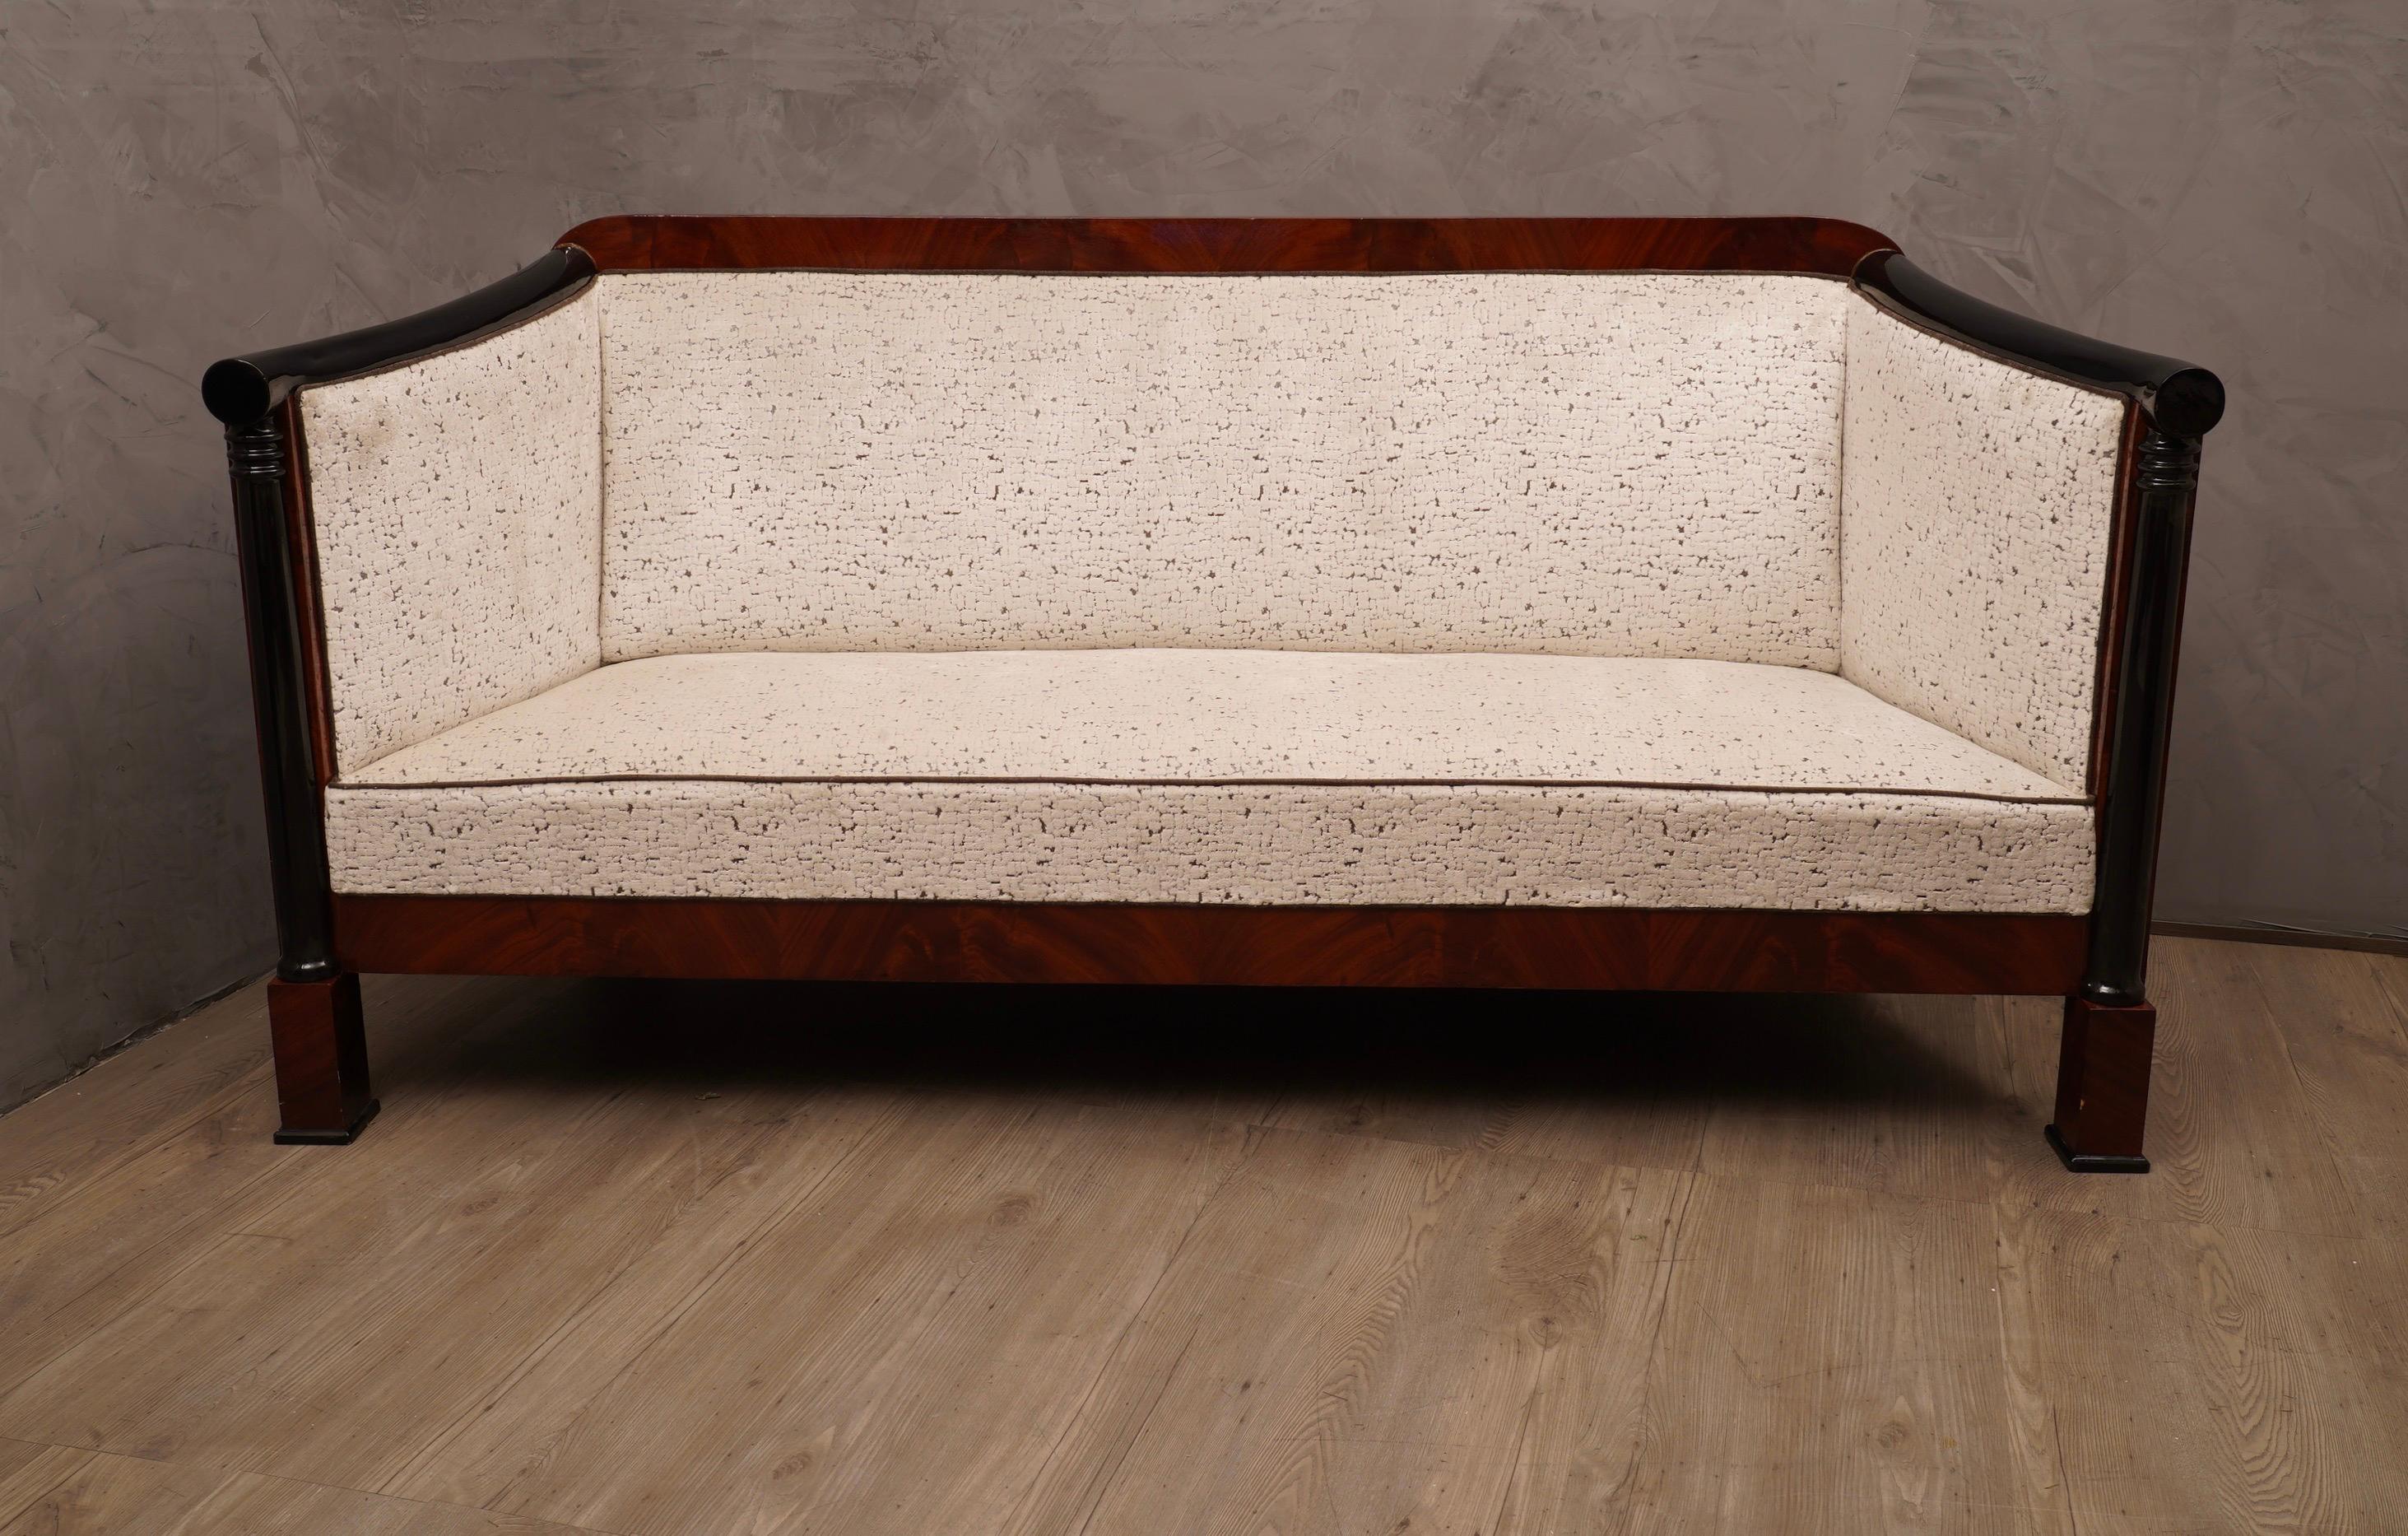 Superb sofa in very fine mahogany wood, its design is also valuable, covered with a precious white velvet.

The sofa has a wooden structure with mahogany veneer, the two armrests as you can see from the photos, are in black lacquered beech wood. The